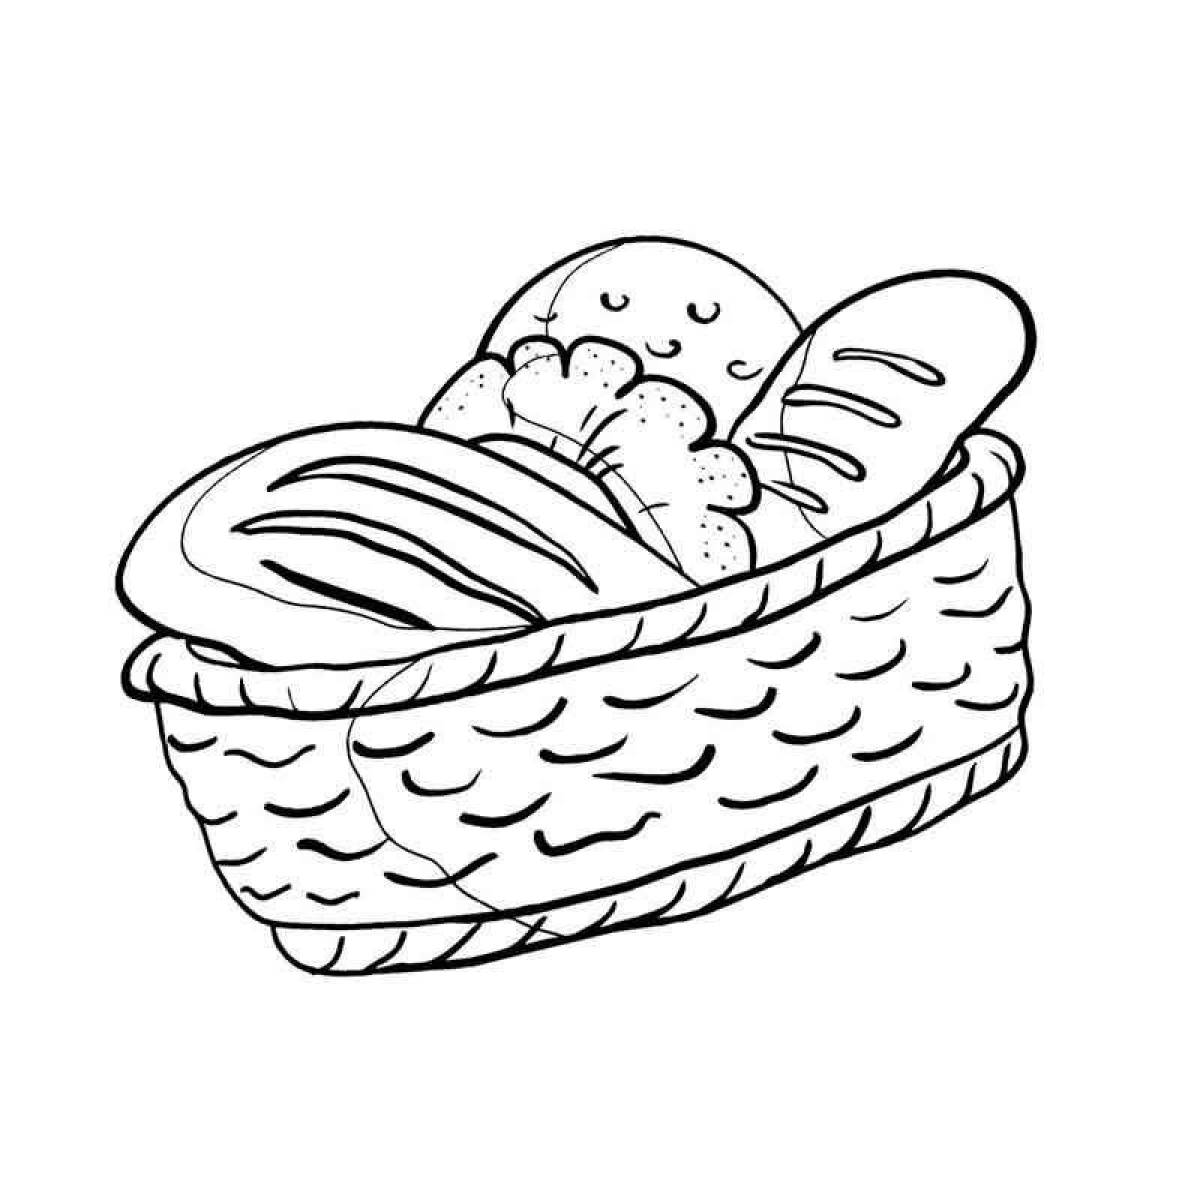 Luminous Bread Coloring Page for Students